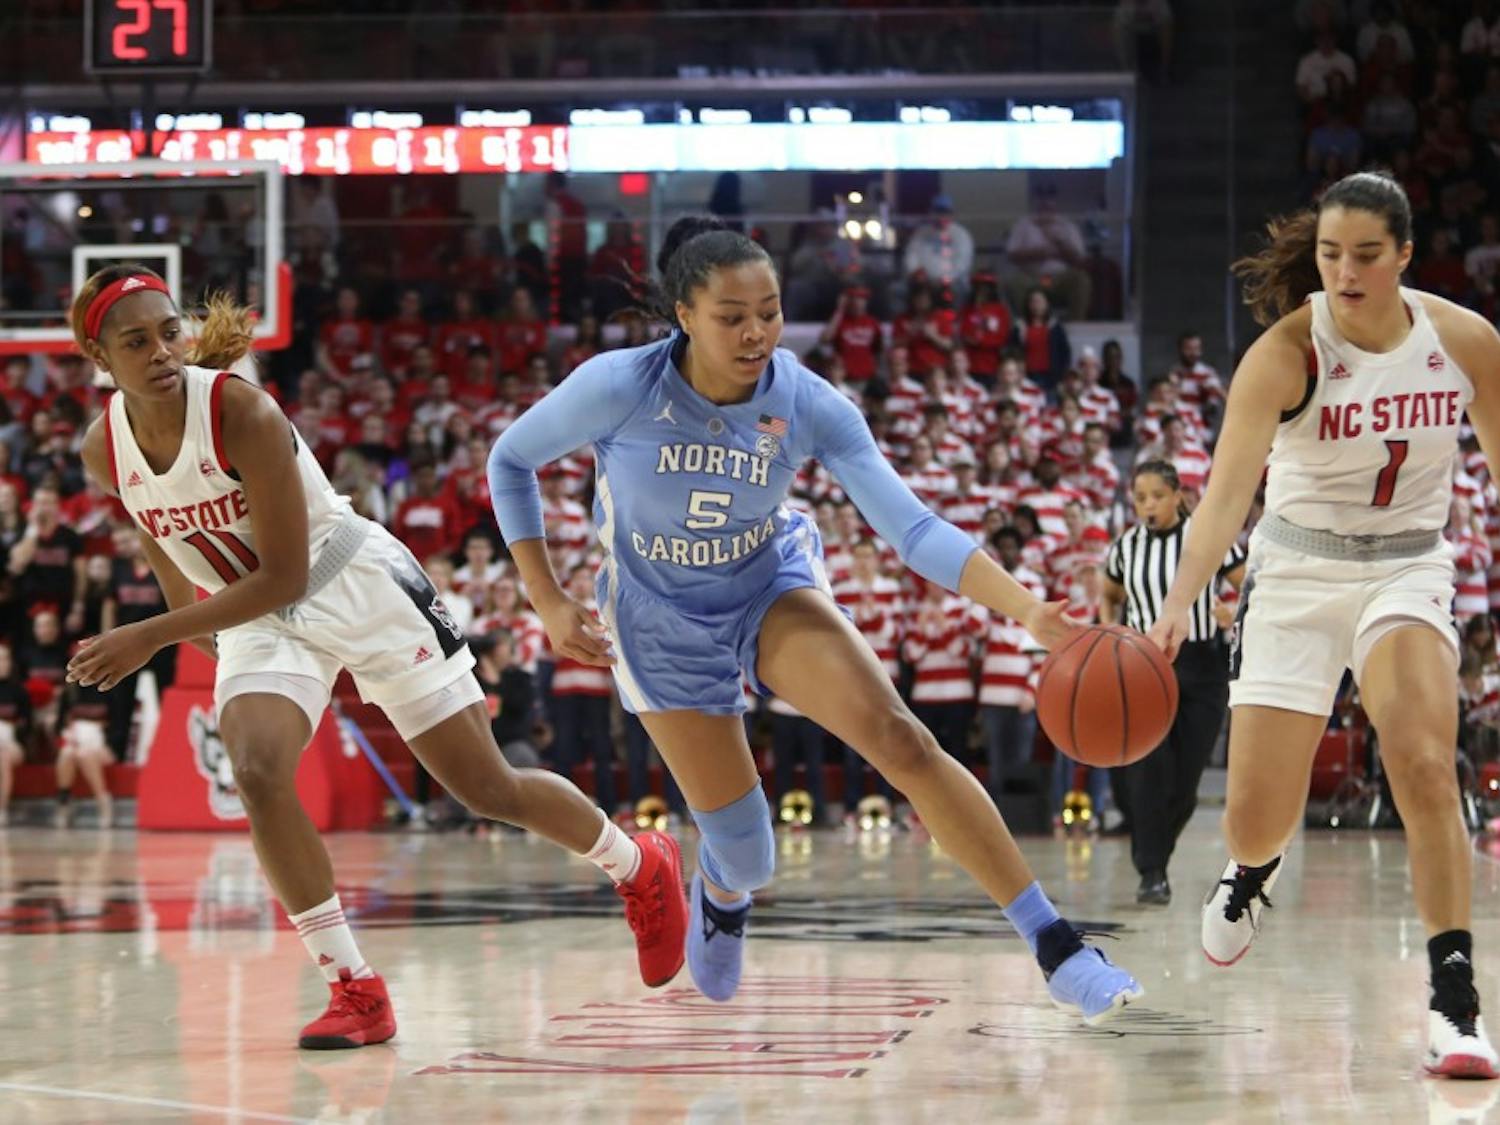 Tar Heel redshirt junior guard Stephanie Watts (5) steals the ball from Wolfpack junior guard Aislinn Konig (1) during UNC's 64-51 win against NC State at Reynolds Coliseum on Sunday, Feb. 3, 2019 in Raleigh, NC. The Tar Heels Women's Basketball Team (14-9) handed the Wolfpack (21-1) their first loss of the season.